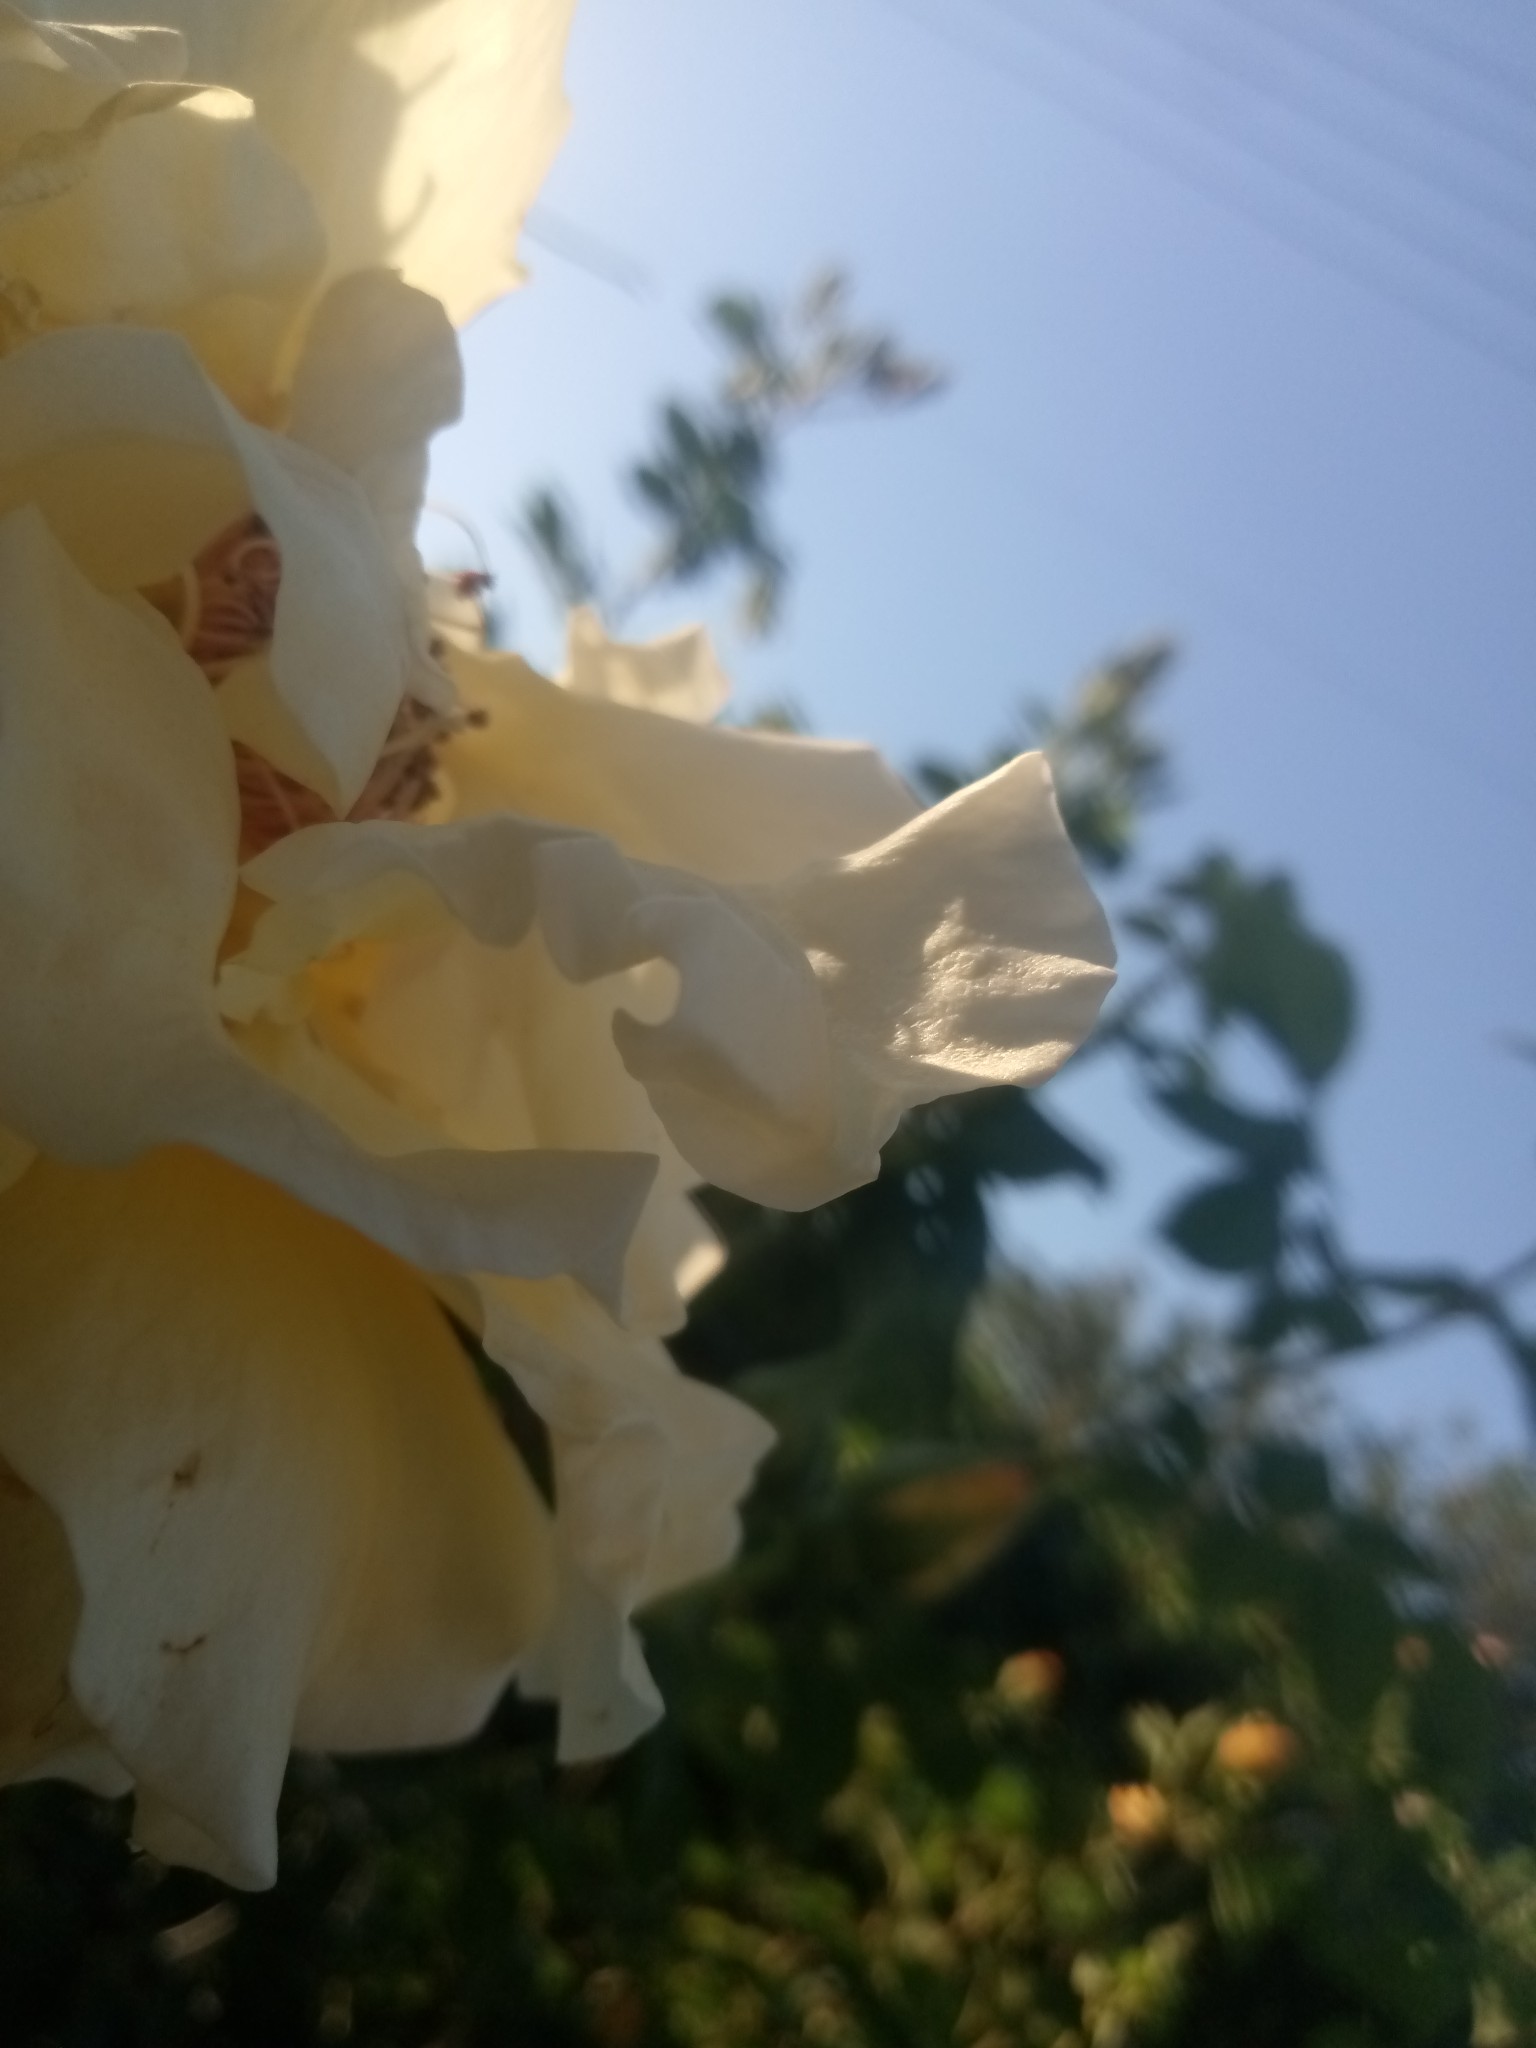 Yellow rose pictures